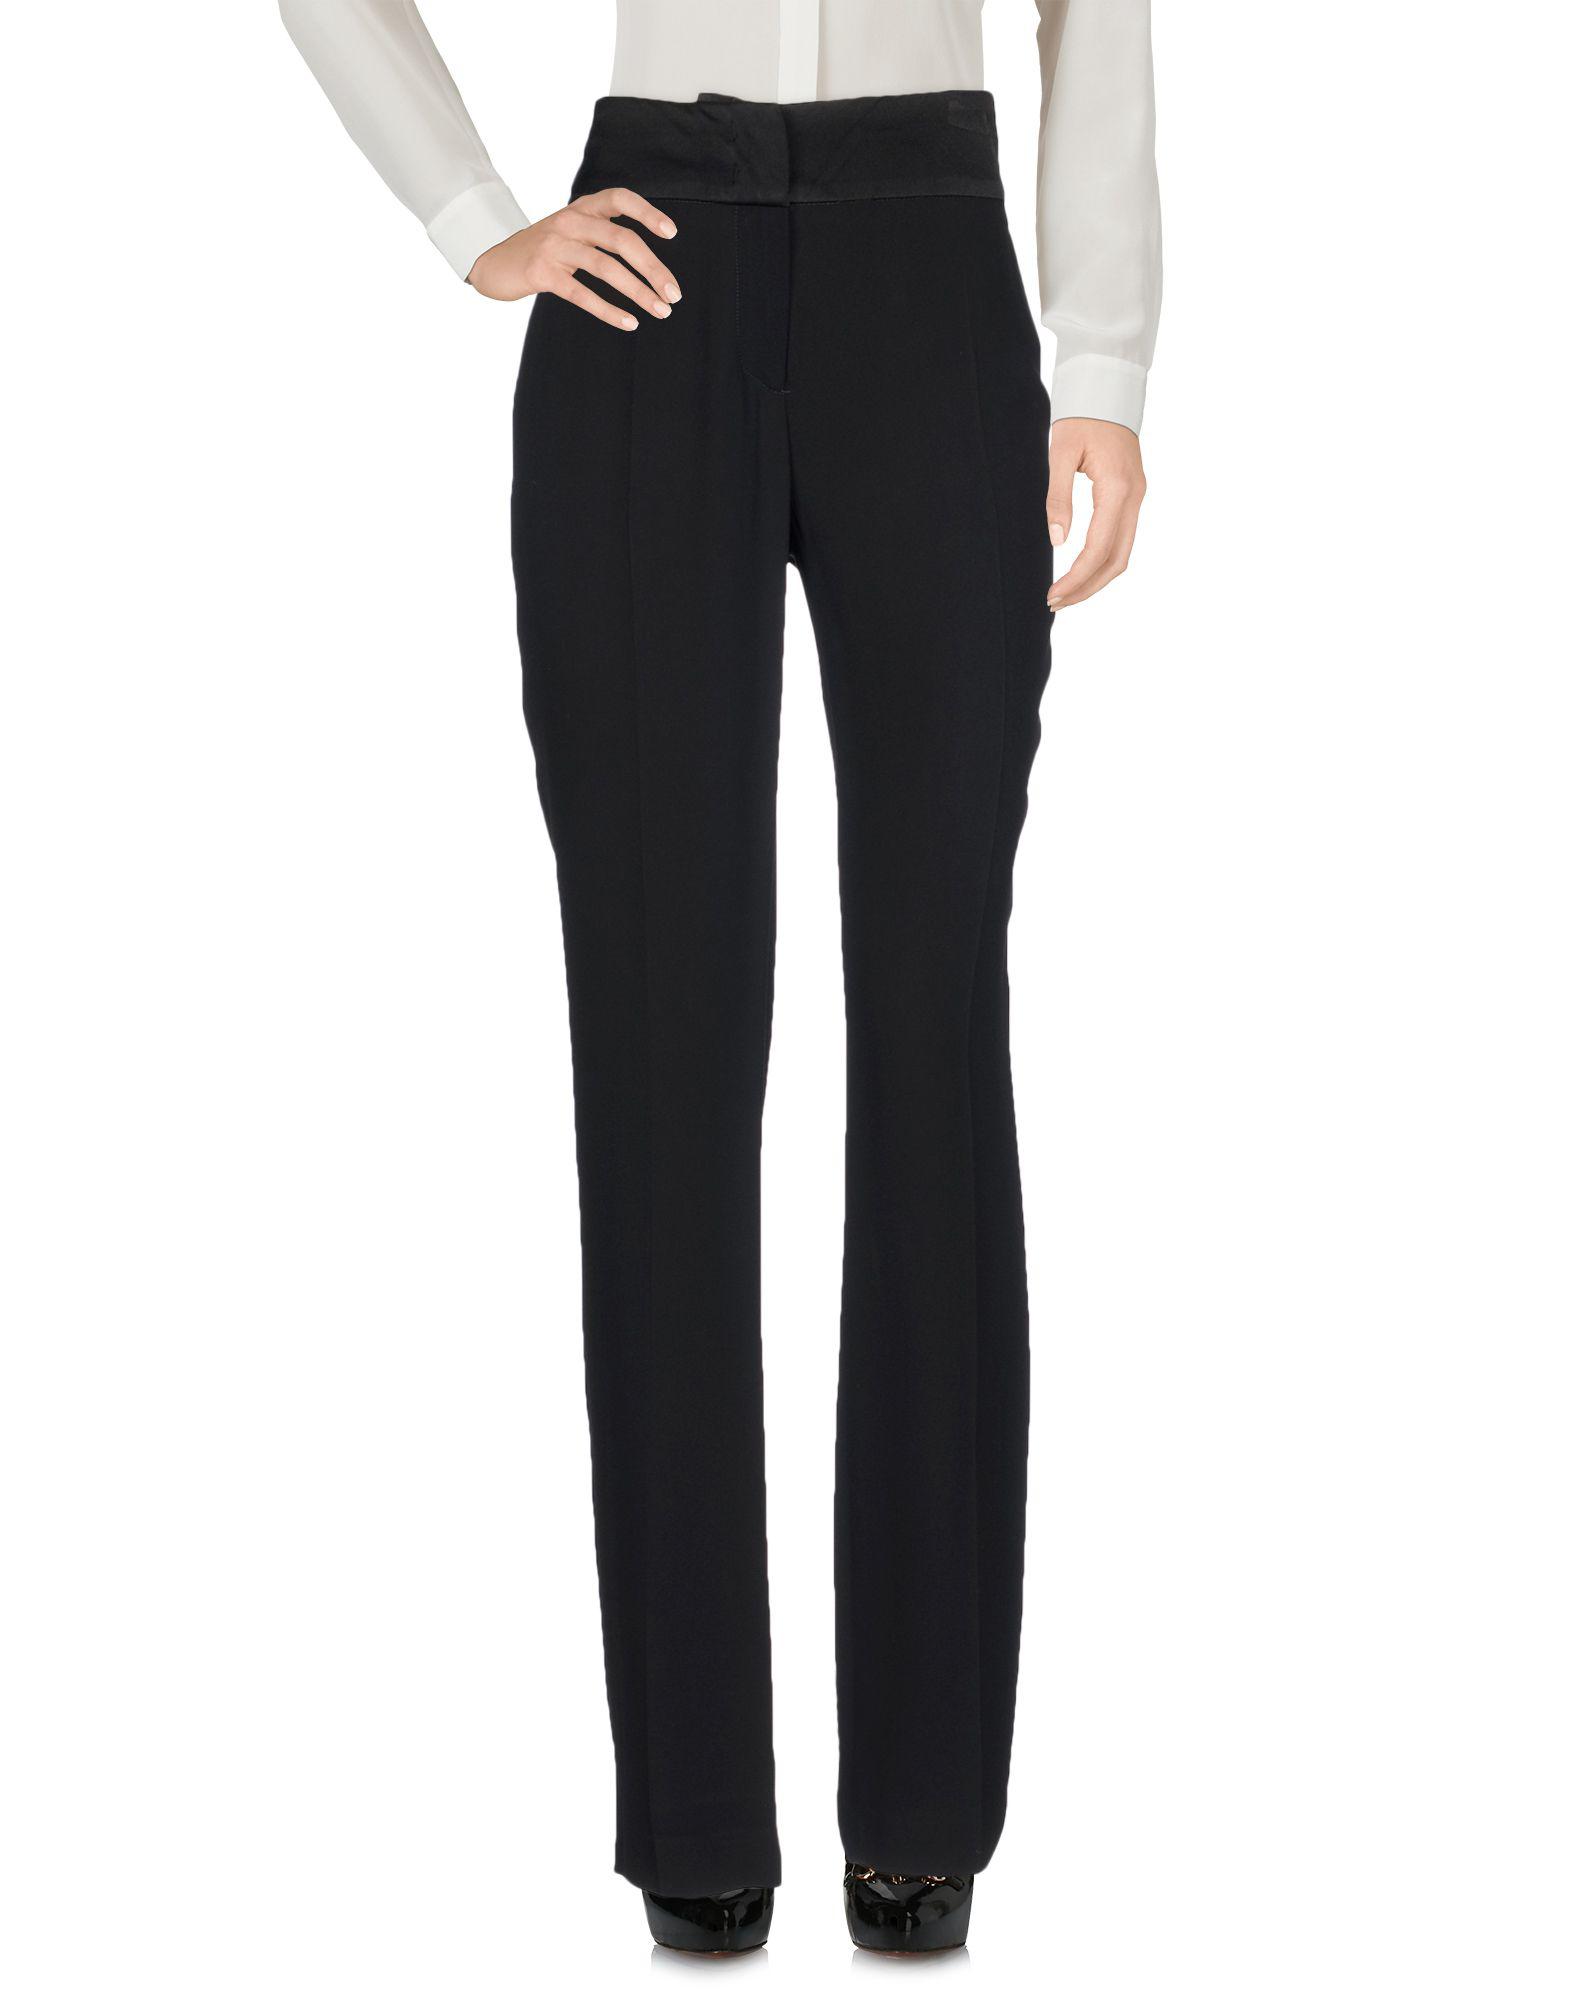 Emilio Pucci Satin Casual Pants in Black - Lyst